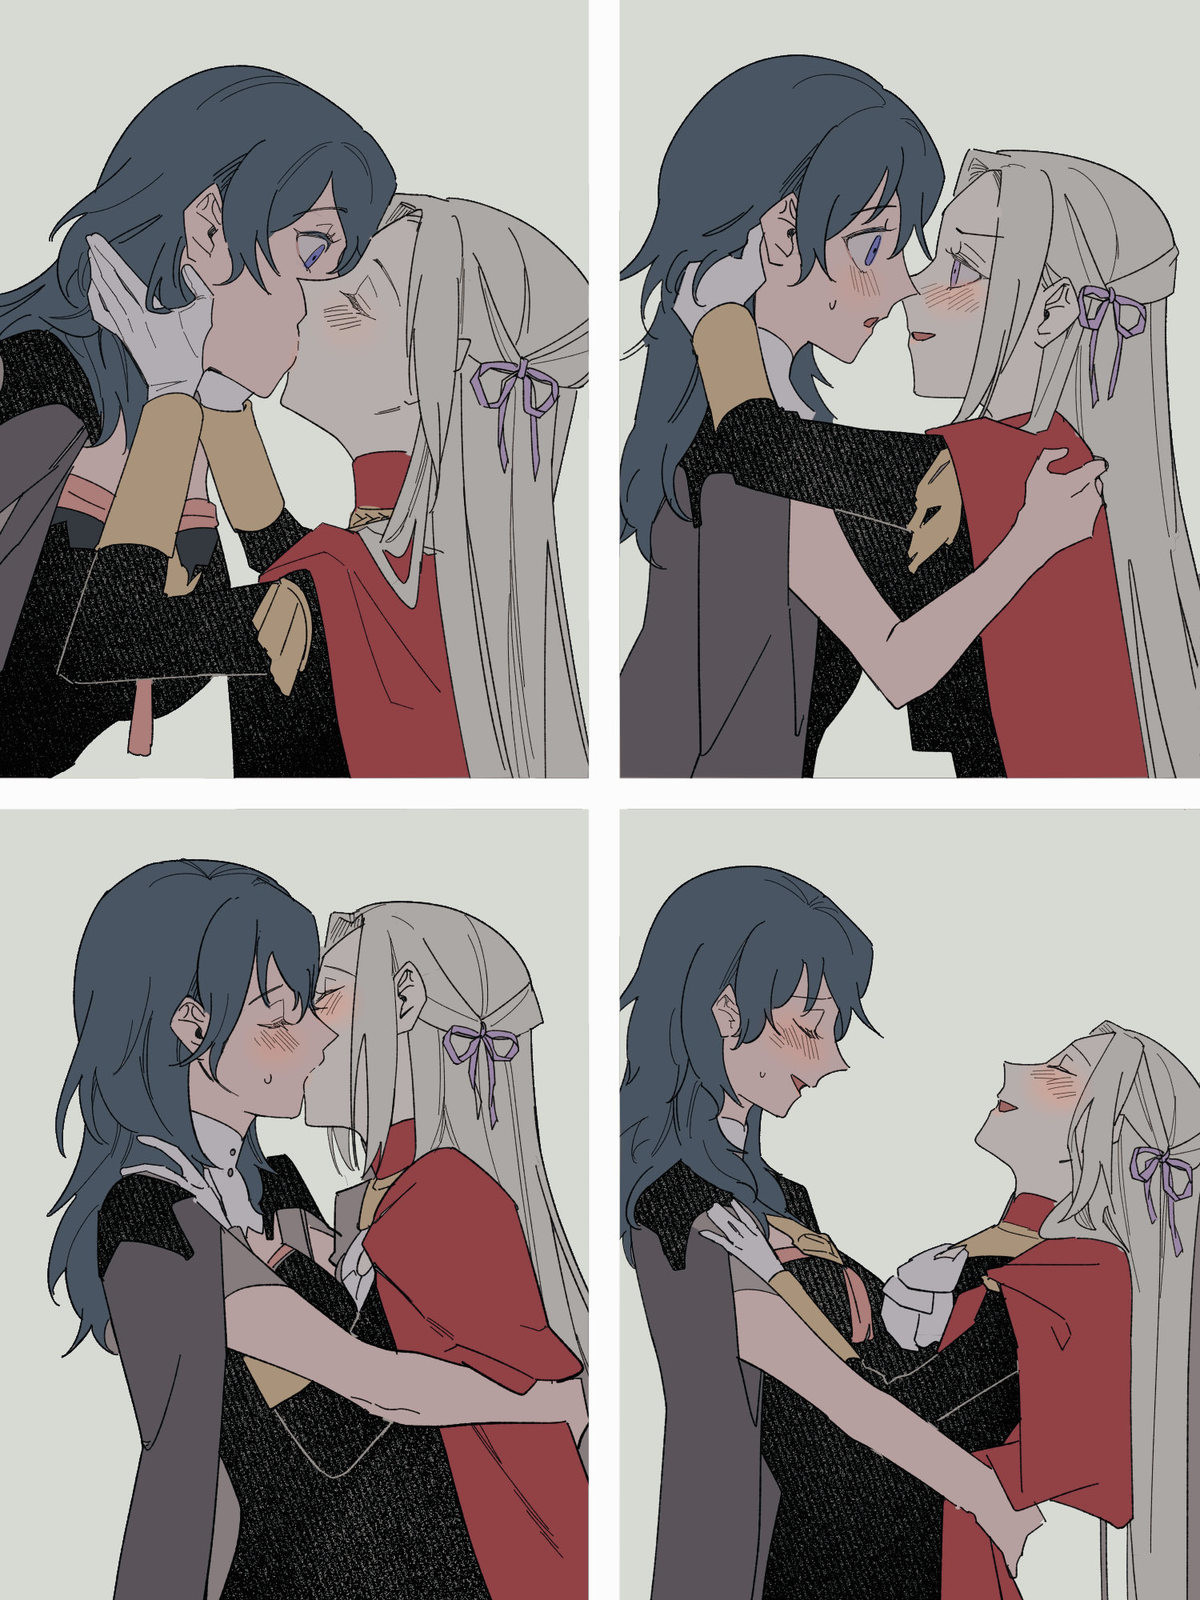 edeleth besteleth. .. Top tier ship Three houses had fantastic support and romance all-round to be honest.